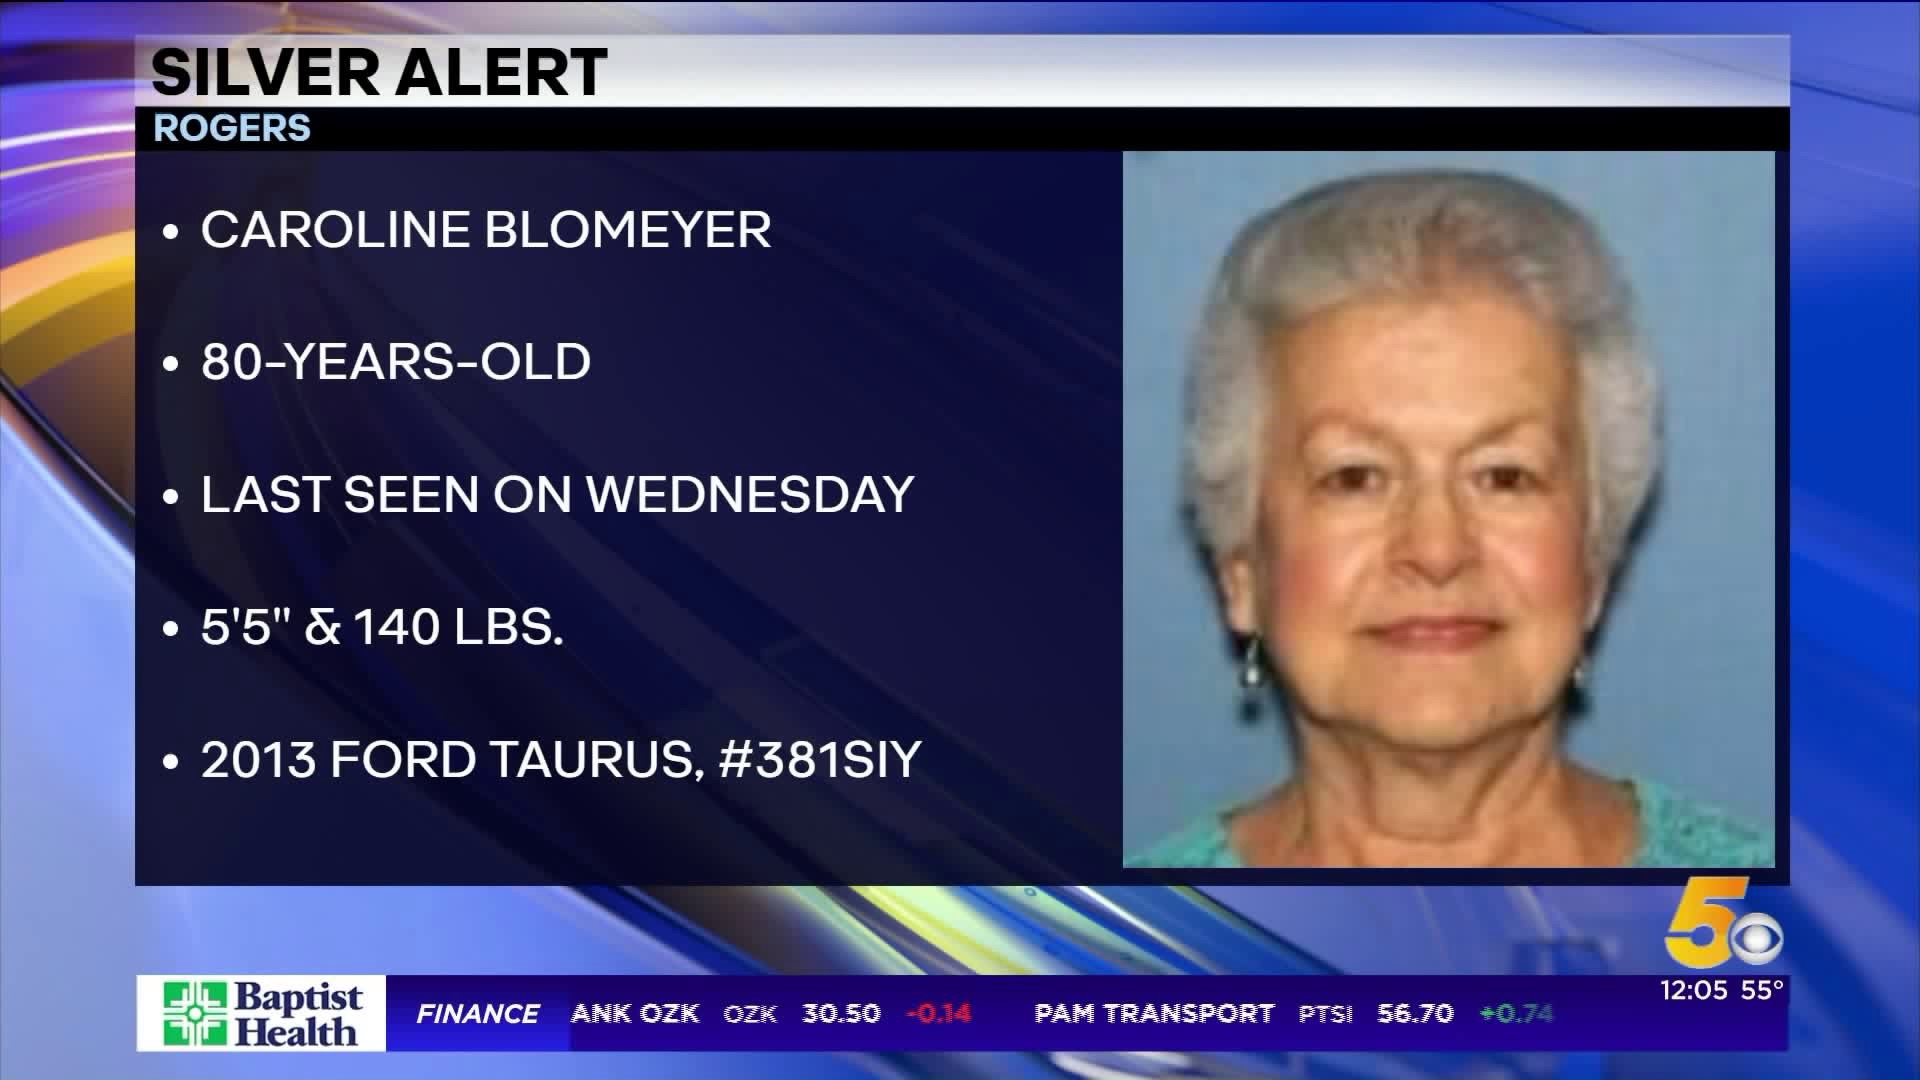 Rogers Police Department Puts Out Silver Alert For Missing Woman